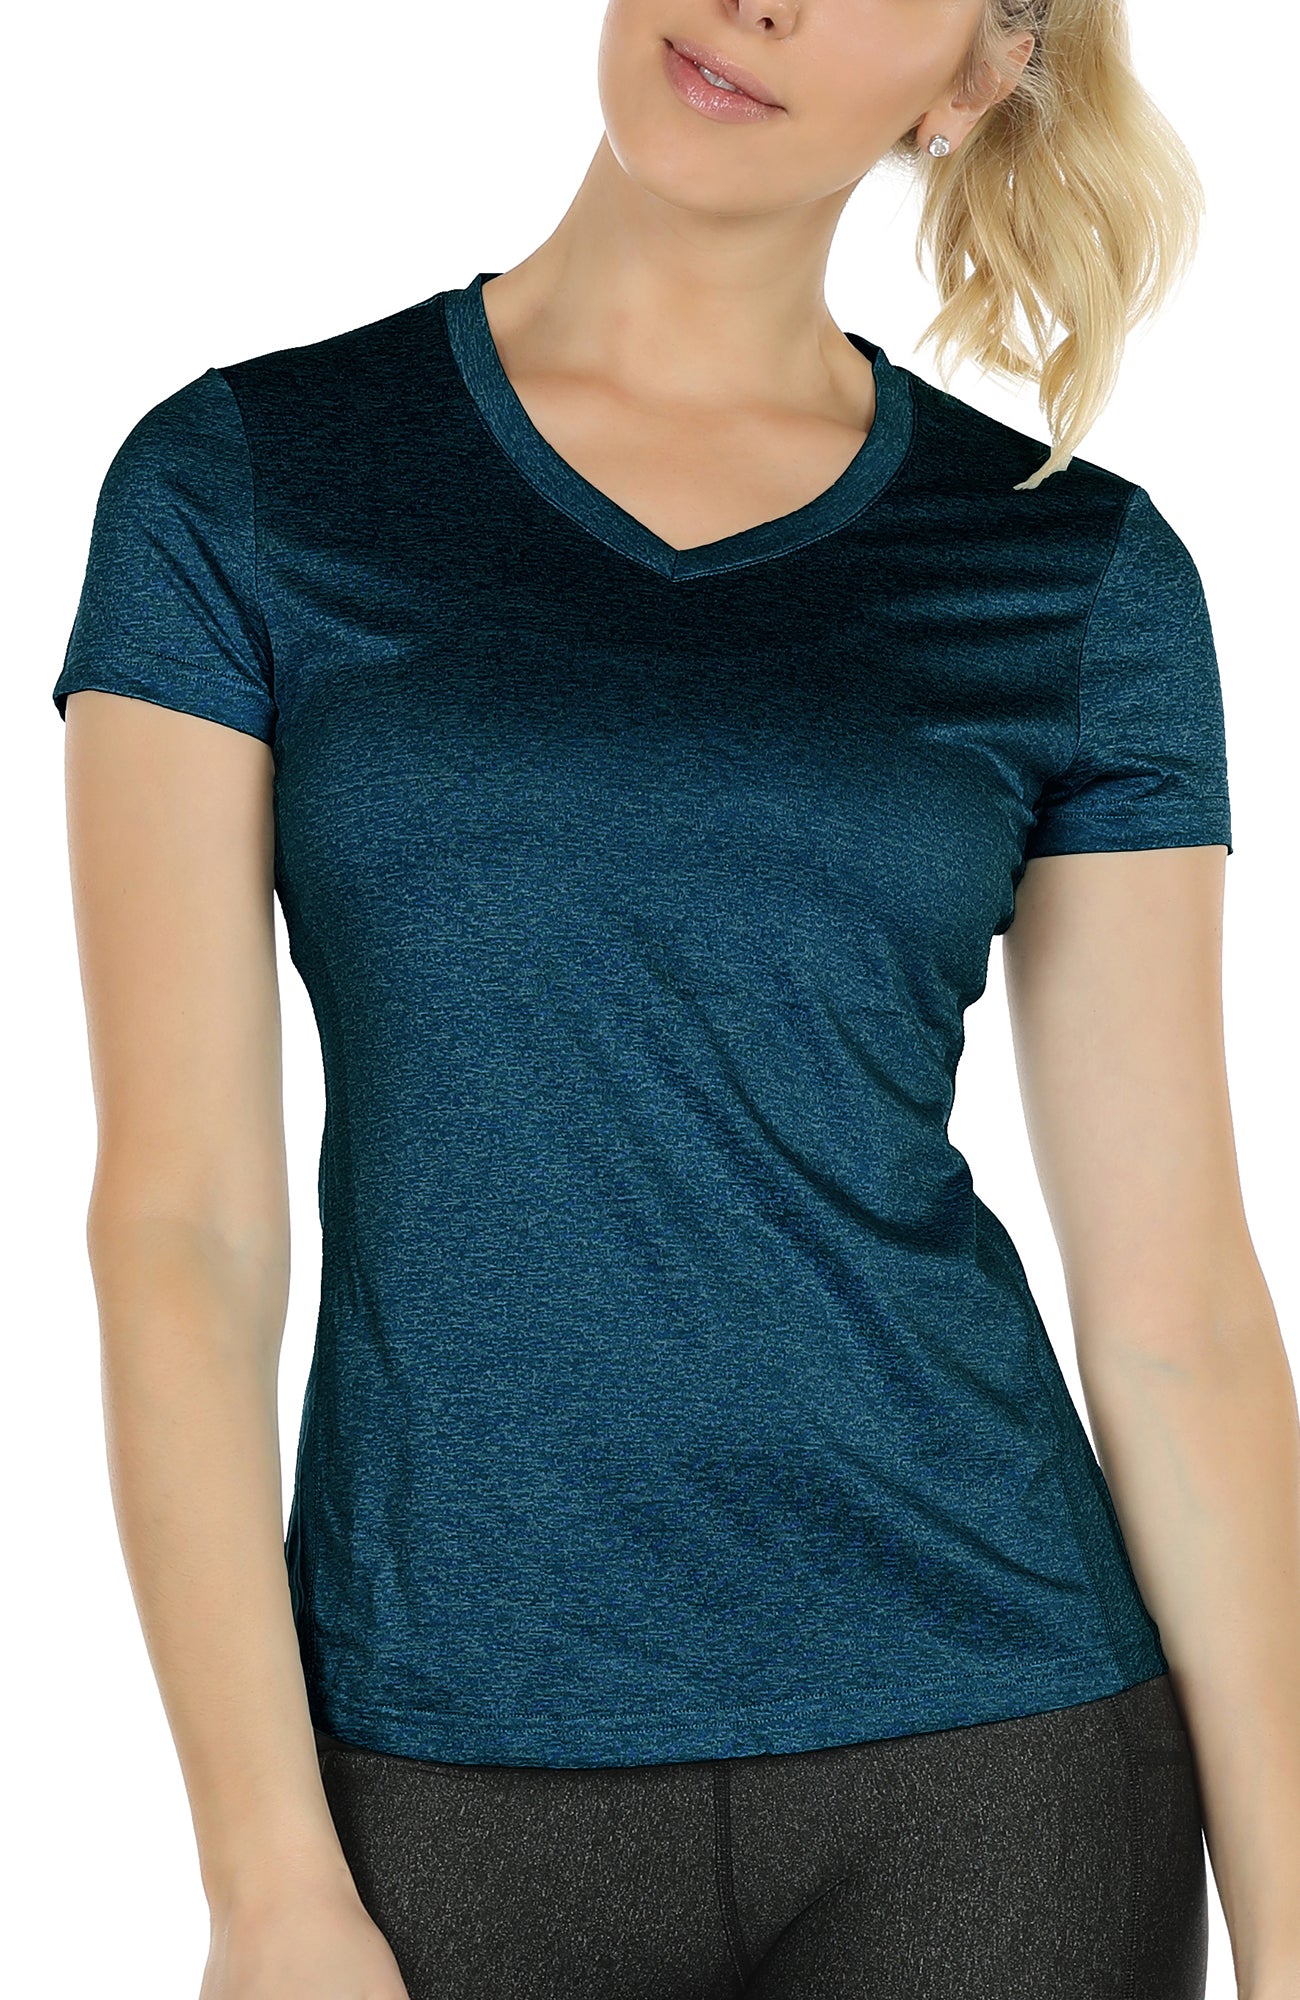 Women's Workout Shirts & Tops in Blue